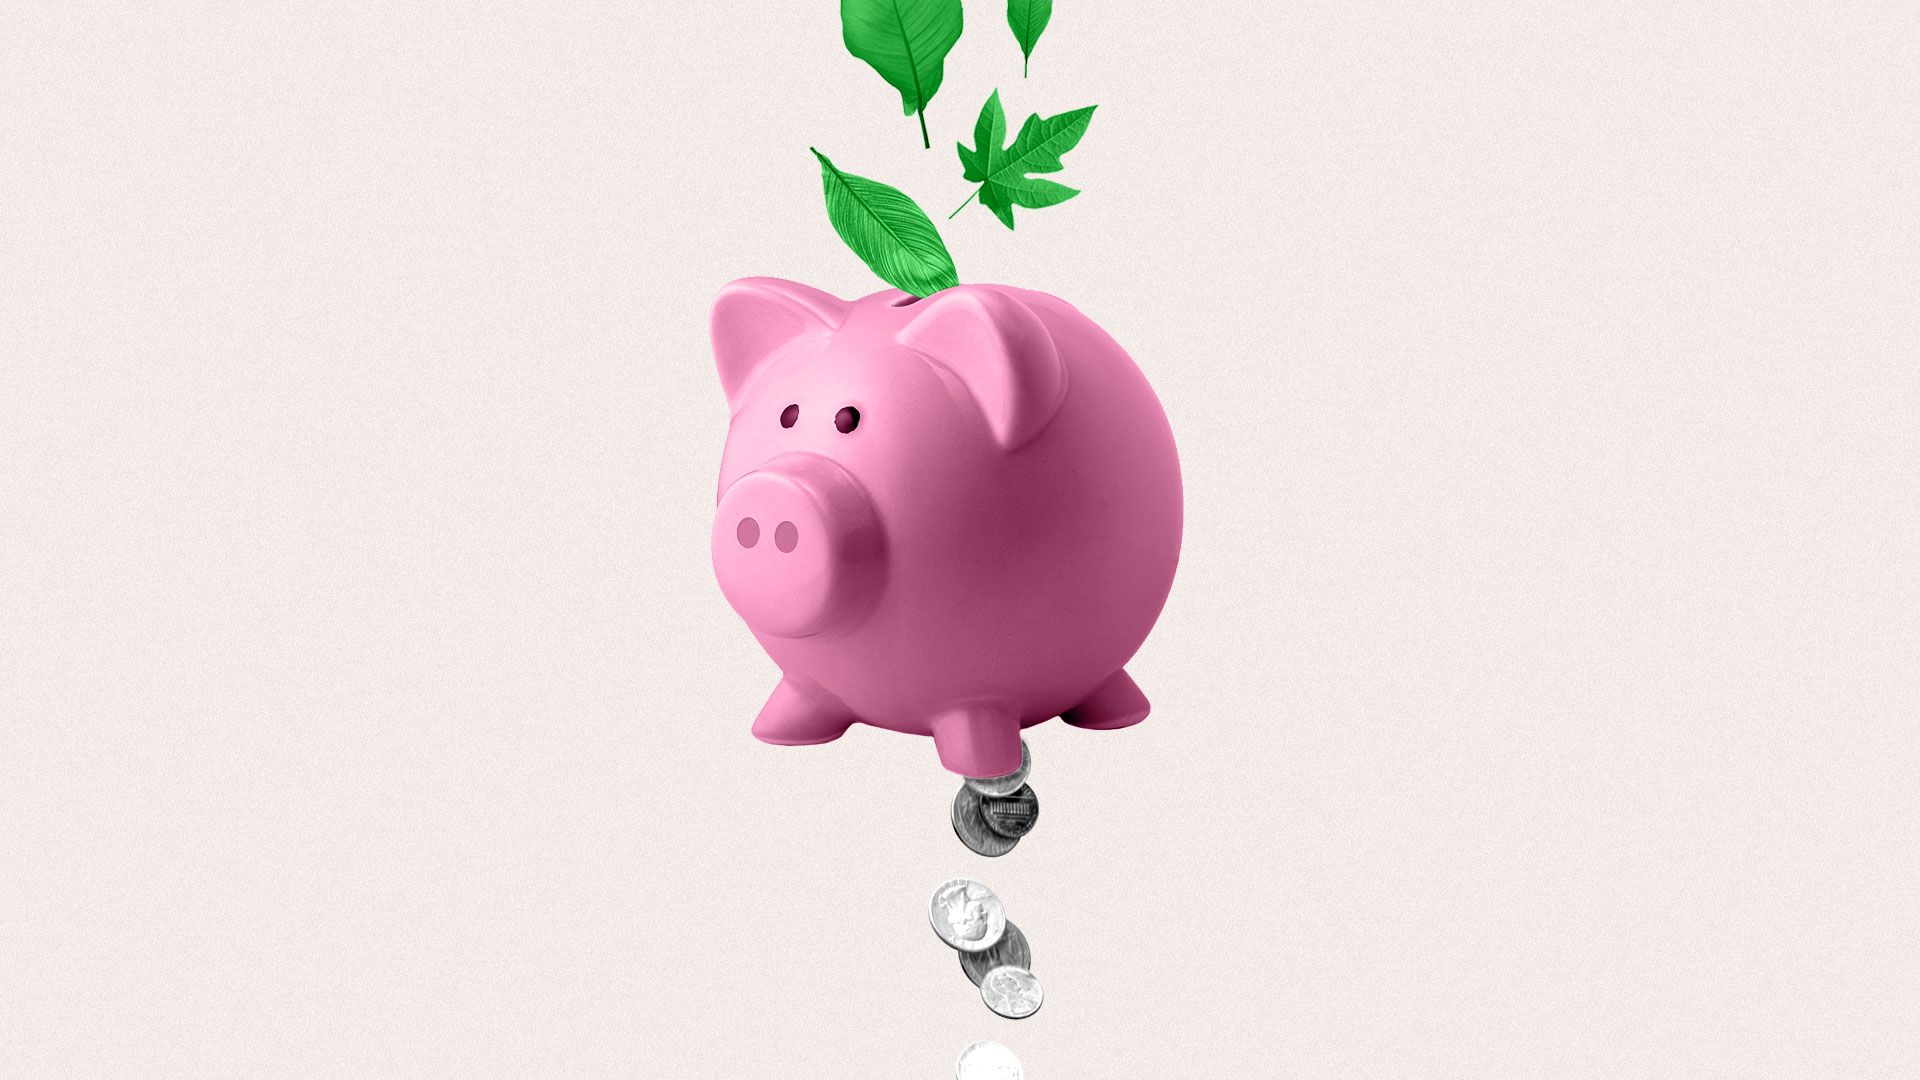 Illustration of a piggy bank with leaves coming in one end and coins falling out from the bottom